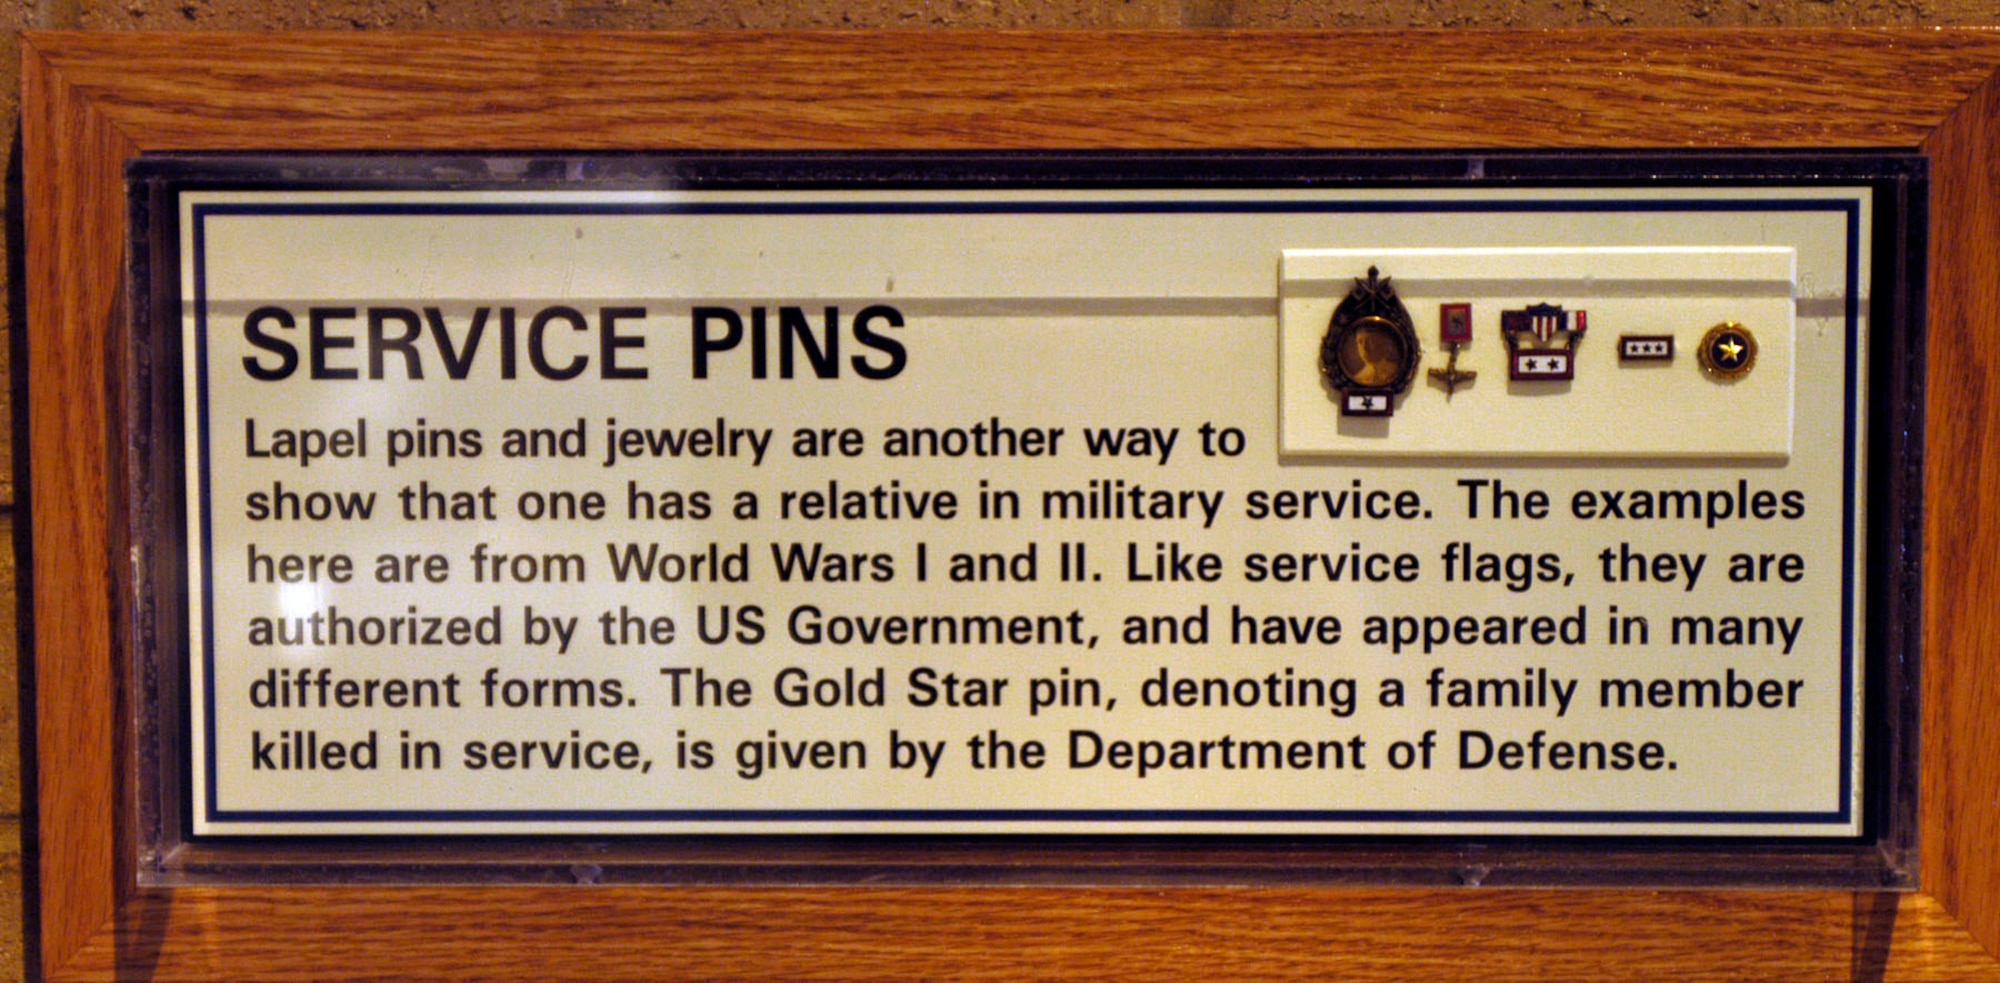 DAYTON, Ohio - Service pins on display at the National Museum of the U.S. Air Force. (U.S. Air Force photo)